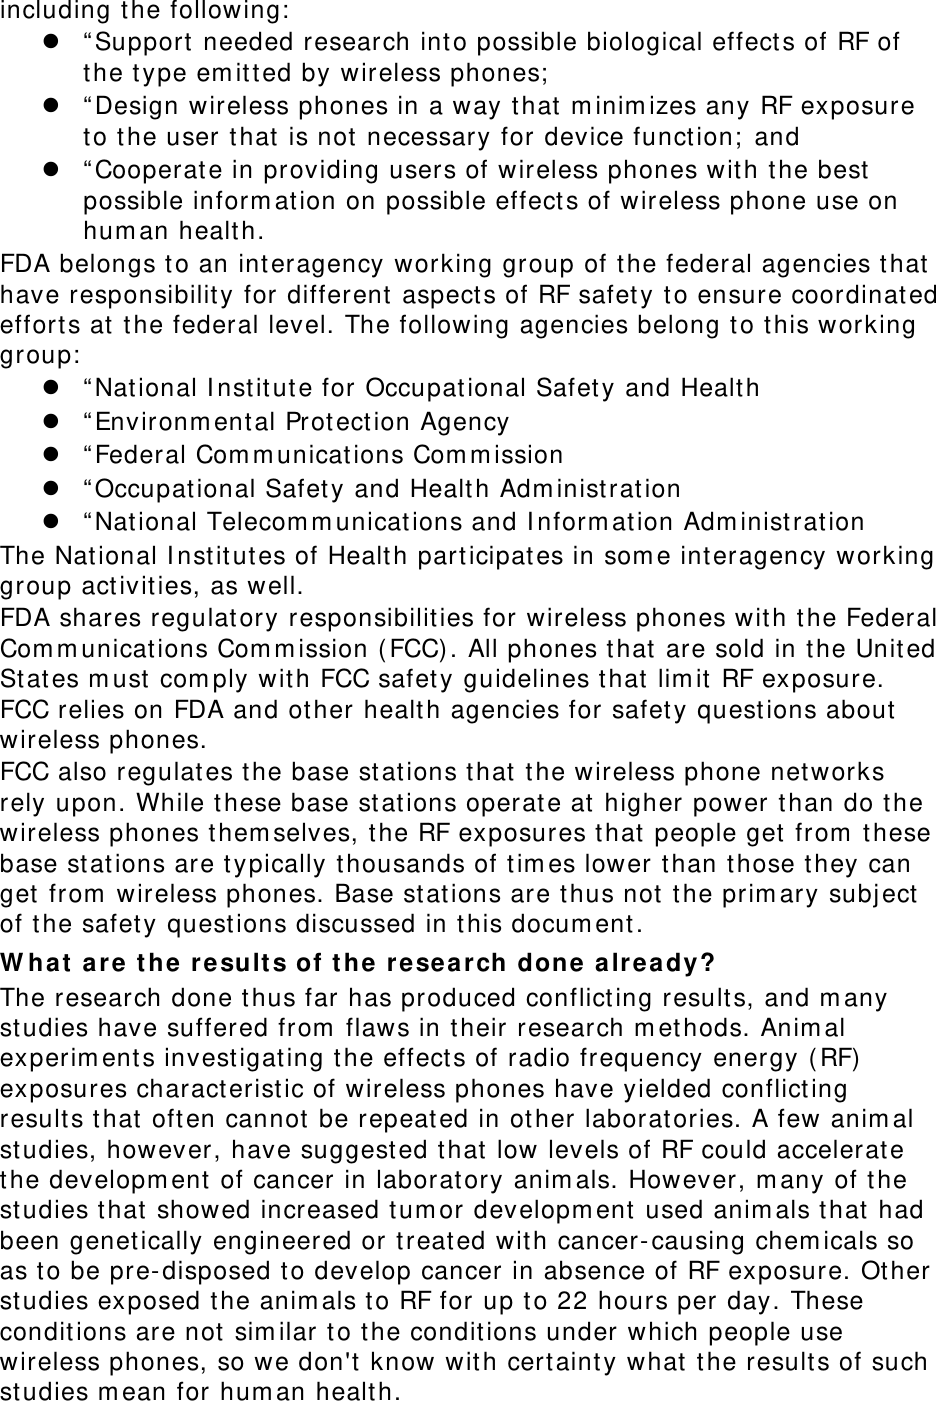 including the following:   “ Support needed research int o possible biological effect s of RF of the type em it t ed by wireless phones;   “ Design wireless phones in a way that  m inim izes any RF exposure to the user t hat  is not necessary for device funct ion;  and  “ Cooperat e in providing users of wireless phones wit h the best  possible inform at ion on possible effect s of wireless phone use on hum an healt h. FDA belongs t o an interagency working group of t he federal agencies t hat  have responsibilit y for different aspect s of RF safet y to ensure coordinat ed efforts at  the federal level. The following agencies belong t o t his working group:   “ National I nst itut e for Occupat ional Safety and Healt h  “ Environm ental Prot ect ion Agency  “ Federal Com m unications Com m ission  “ Occupat ional Safet y and Health Adm inist rat ion  “ National Telecom m unicat ions and I nform at ion Adm inist rat ion The Nat ional I nstit ut es of Health part icipat es in som e interagency working group act ivities, as well. FDA shares regulatory responsibilities for wireless phones wit h t he Federal Com m unicat ions Com m ission ( FCC). All phones that  are sold in the United St at es m ust com ply with FCC safet y guidelines t hat  lim it  RF exposure. FCC relies on FDA and other healt h agencies for safet y questions about  wireless phones. FCC also regulates t he base st at ions that  the wireless phone networks rely upon. While these base st at ions operat e at  higher power t han do t he wireless phones t hem selves, t he RF exposures t hat  people get  from  these base st ations are t ypically t housands of t im es lower than those t hey can get  from  wireless phones. Base st at ions are thus not t he prim ary subj ect  of t he safet y quest ions discussed in t his docum ent. W hat  a re t he result s of t he r e sea r ch done alre a dy? The research done t hus far has produced conflict ing result s, and m any studies have suffered from  flaws in their research m et hods. Anim al experim ents investigat ing the effect s of radio frequency energy (RF) exposures characteristic of wireless phones have yielded conflict ing results t hat oft en cannot  be repeat ed in ot her laborat ories. A few anim al studies, however, have suggest ed t hat low levels of RF could accelerat e the developm ent of cancer in laborat ory anim als. However, m any of t he studies that  showed increased t um or developm ent  used anim als t hat  had been genet ically engineered or t reat ed with cancer-causing chem icals so as t o be pre- disposed t o develop cancer in absence of RF exposure. Ot her studies exposed t he anim als t o RF for up to 22 hours per day. These condit ions are not sim ilar t o t he conditions under which people use wireless phones, so we don&apos;t know wit h certaint y what  the result s of such studies m ean for hum an healt h. 